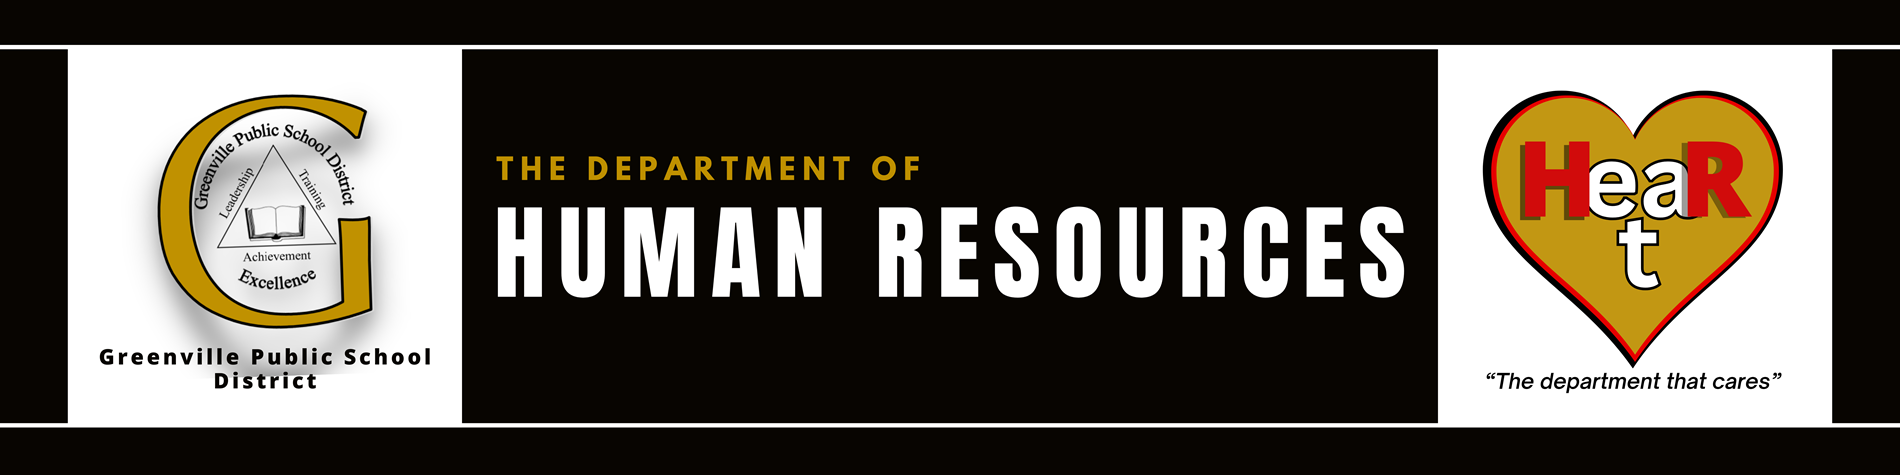 The Department of Human Resources